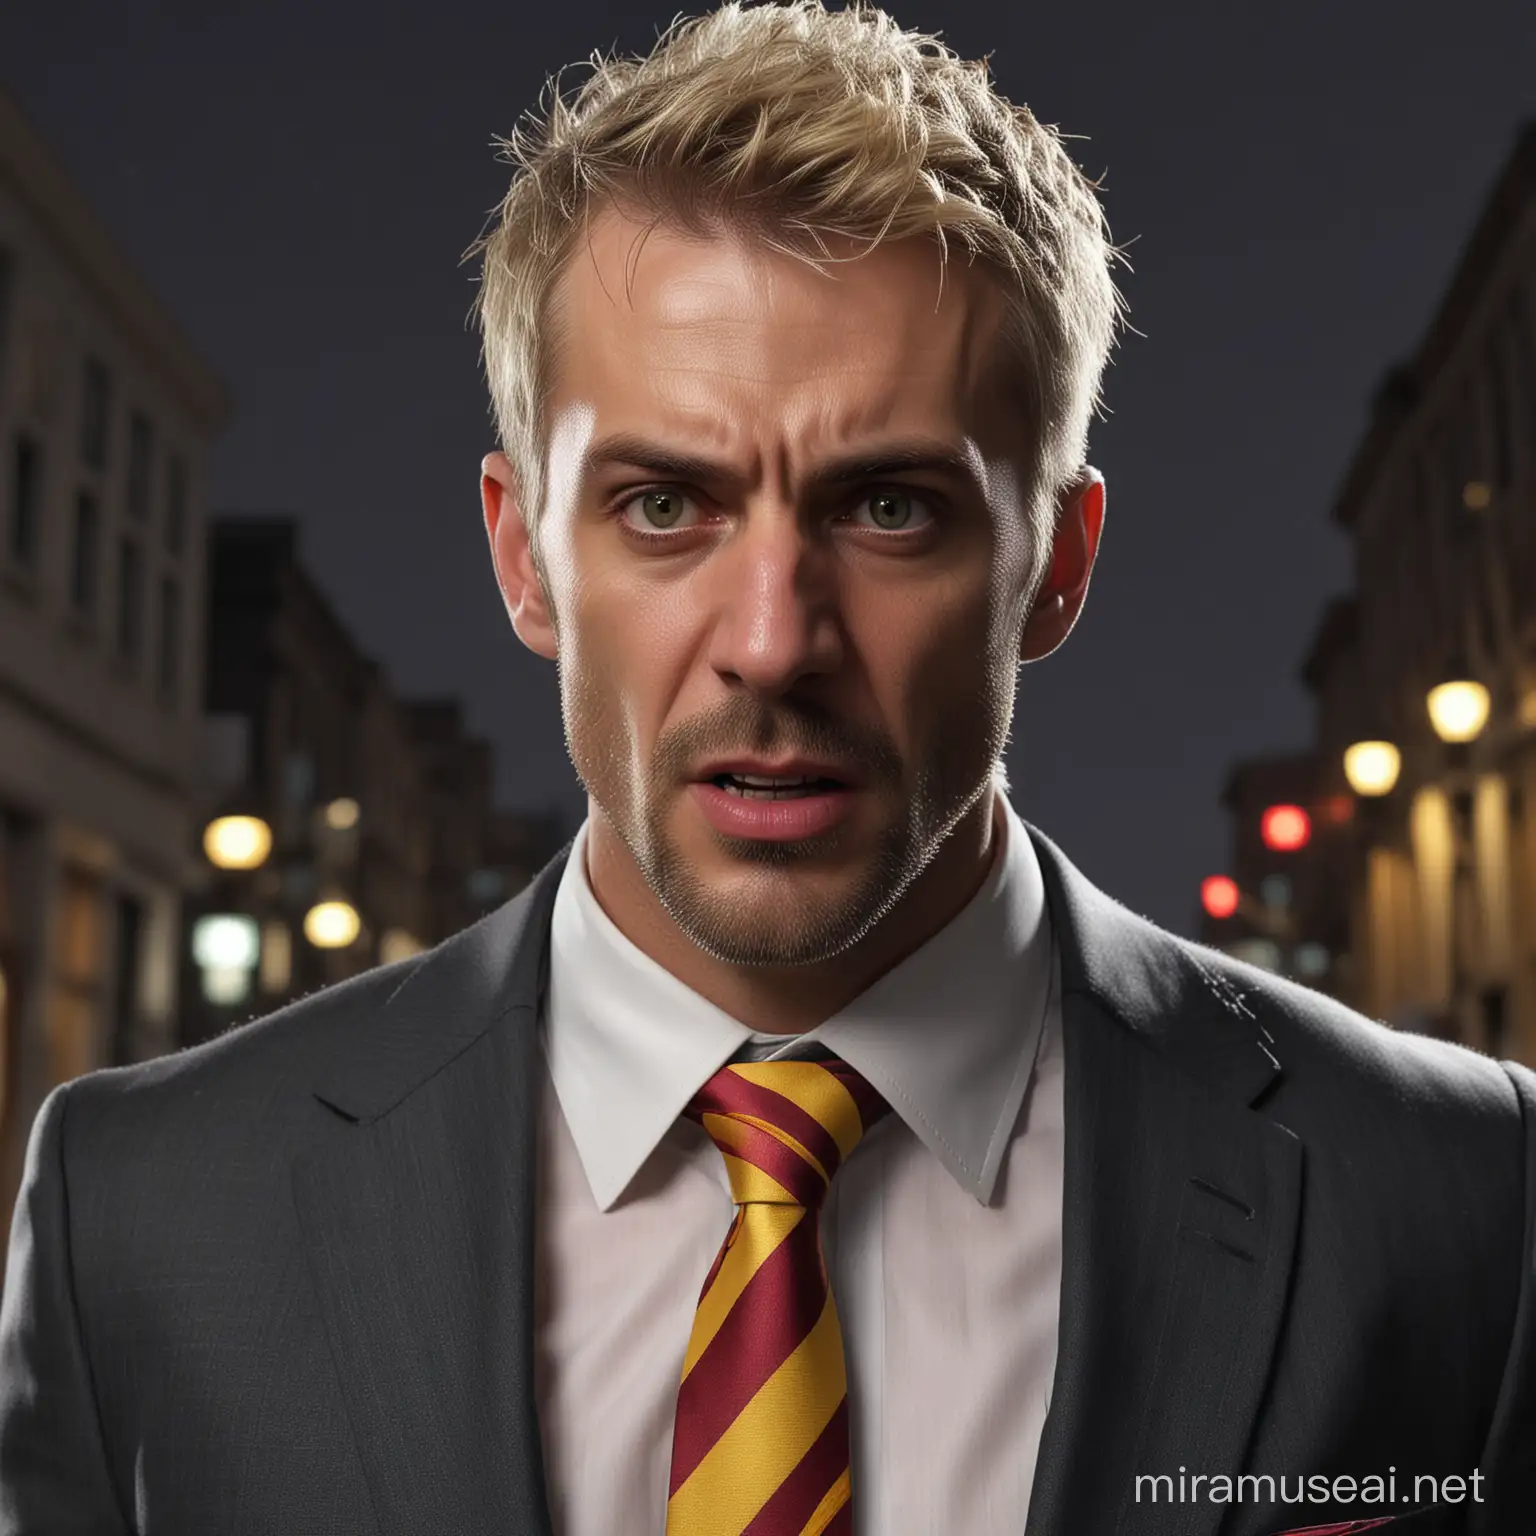 A nocturnal male stressed vampire, blonde short hair, businessman, wearing a suit, red and yellow weird tie, standing outside on the street at night, on his 40s, unshaven beard, madness, a little crazy, scar on his face, hurted, wrinkled clothes, realistic